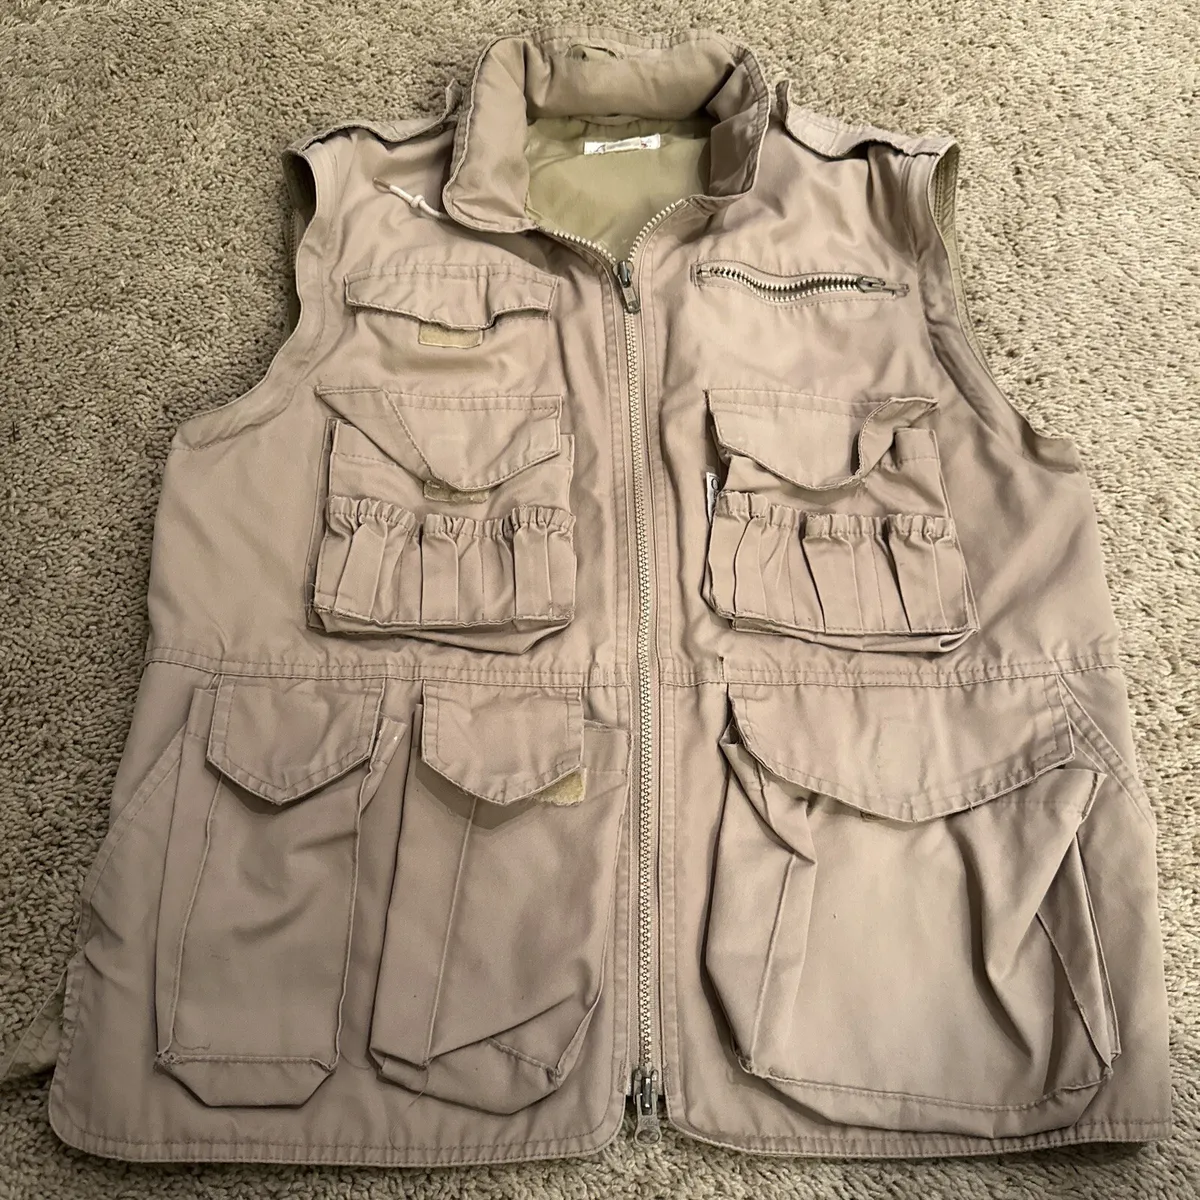 Vintage Orvis Fly Fishing Hunting Tan Vest Men’s Size Small S